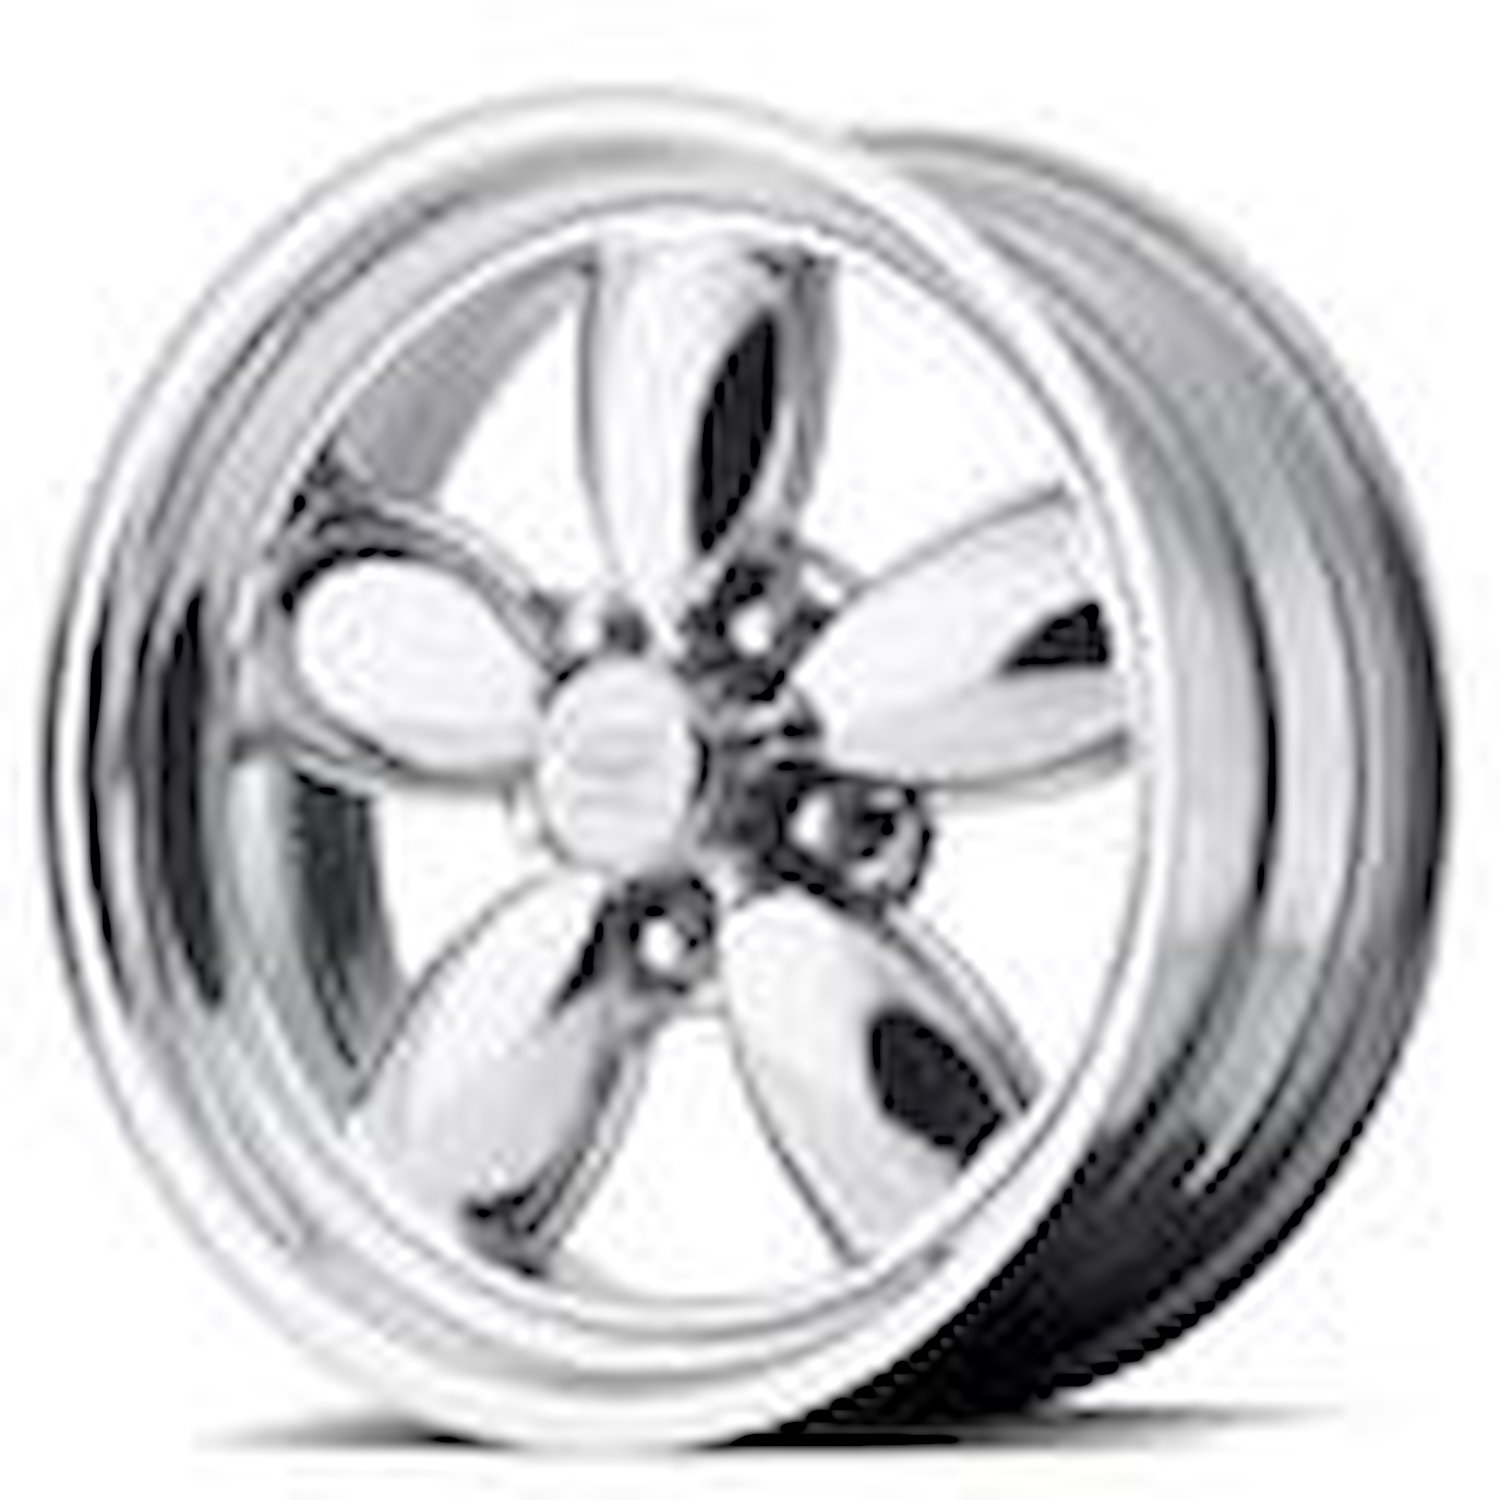 AMERICAN RACING CLASSIC 200S TWO-PIECE POLISHED 17 x 9.5 5X4.75 6 5.49